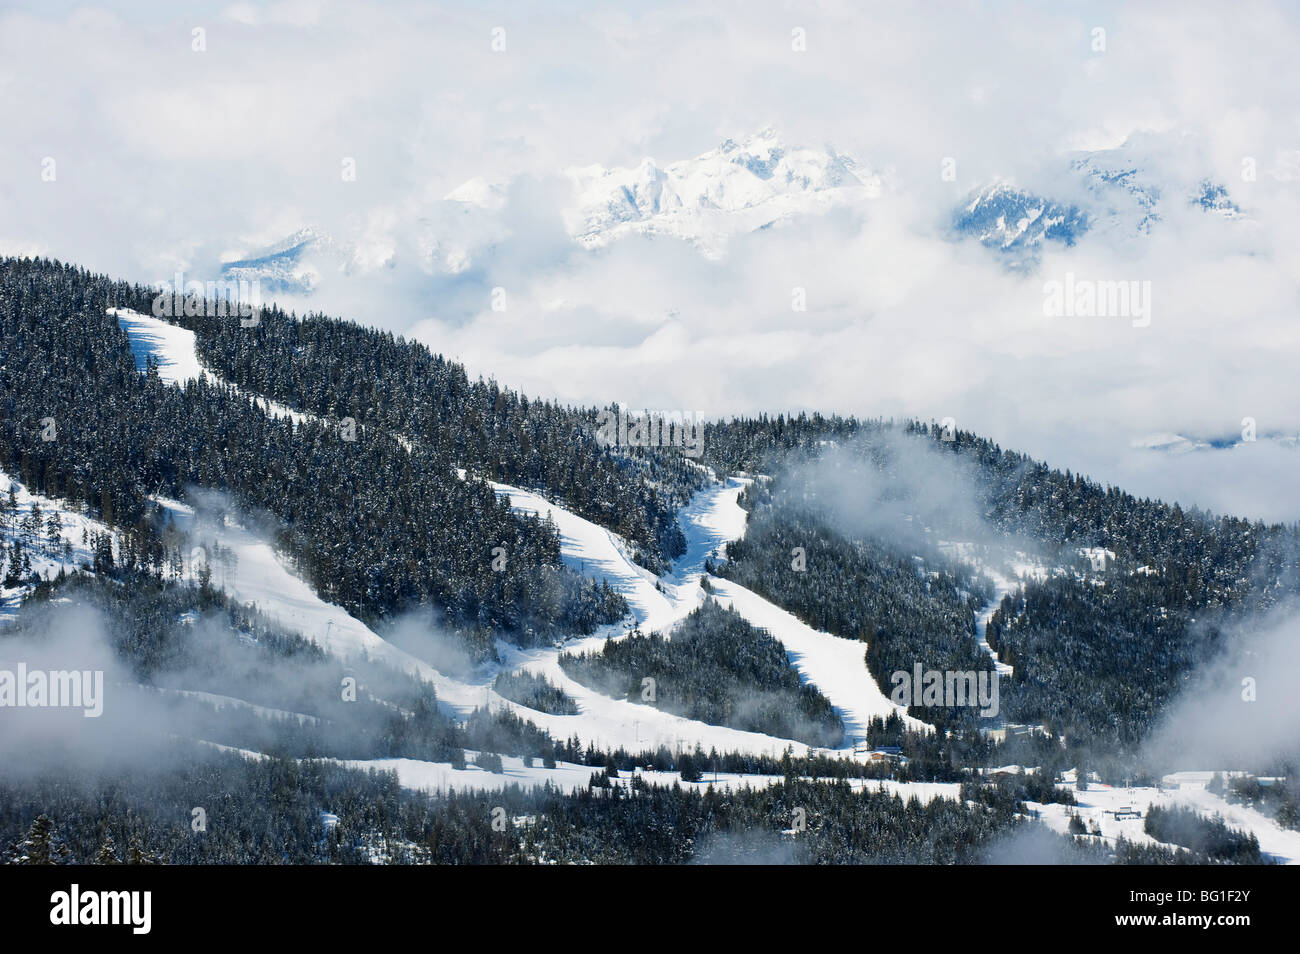 Tree lined ski slopes, Whistler mountain resort, venue of the 2010 Winter Olympic Games, British Columbia, Canada, North America Stock Photo